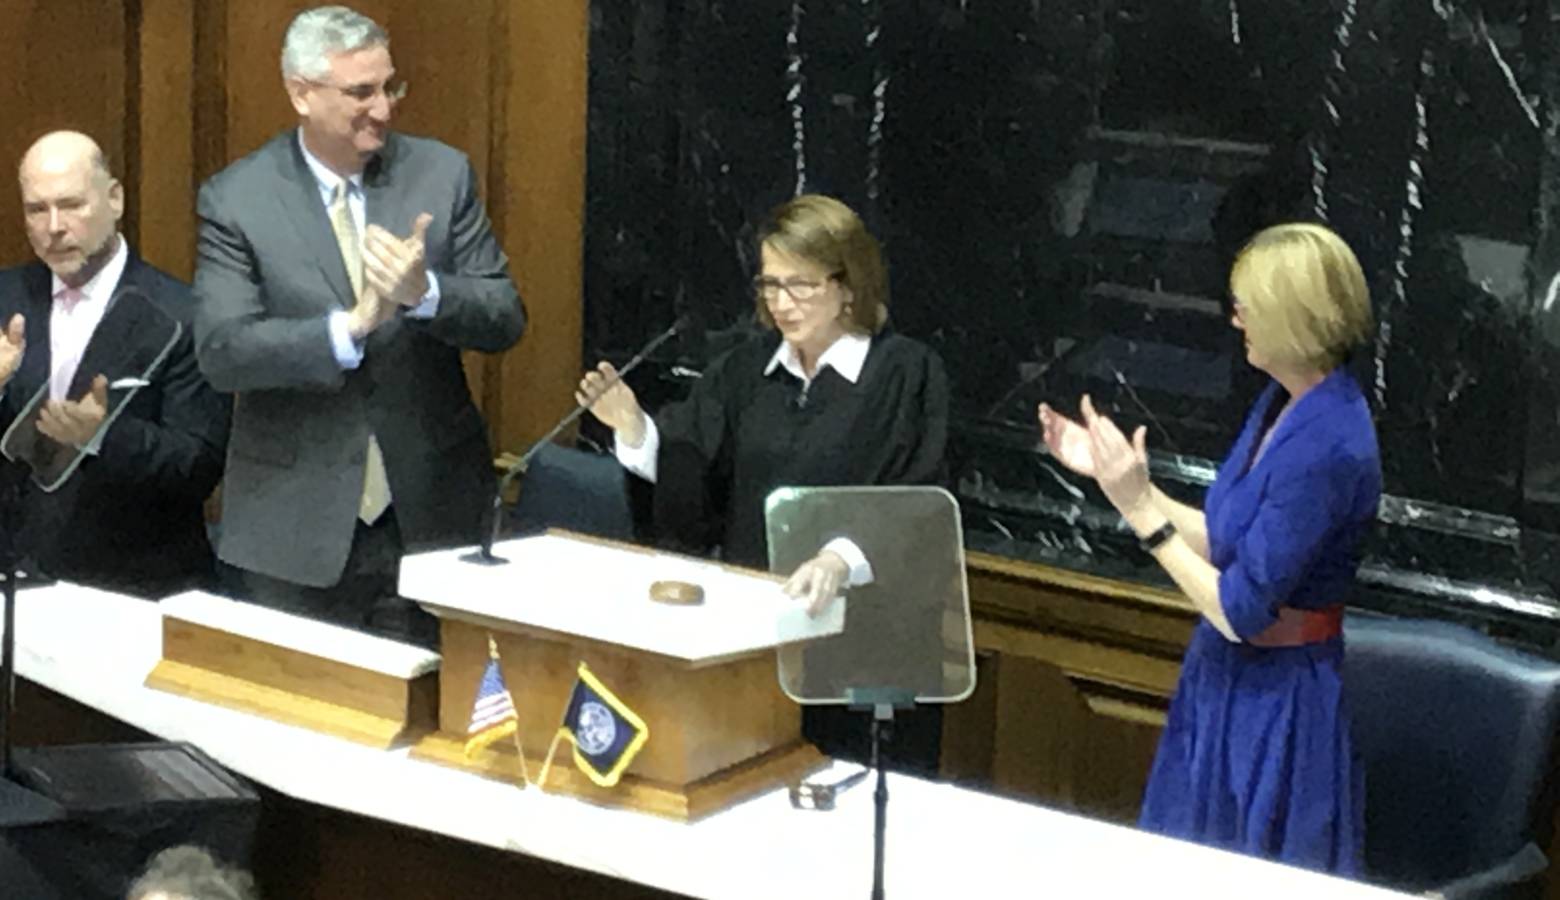 Gov. Eric Holcomb (left) and Lt. Gov. Suzanne Crouch (right) applaud Chief Justice Loretta Rush as she completes her State of the Judiciary address. (Brandon Smith/IPB News)